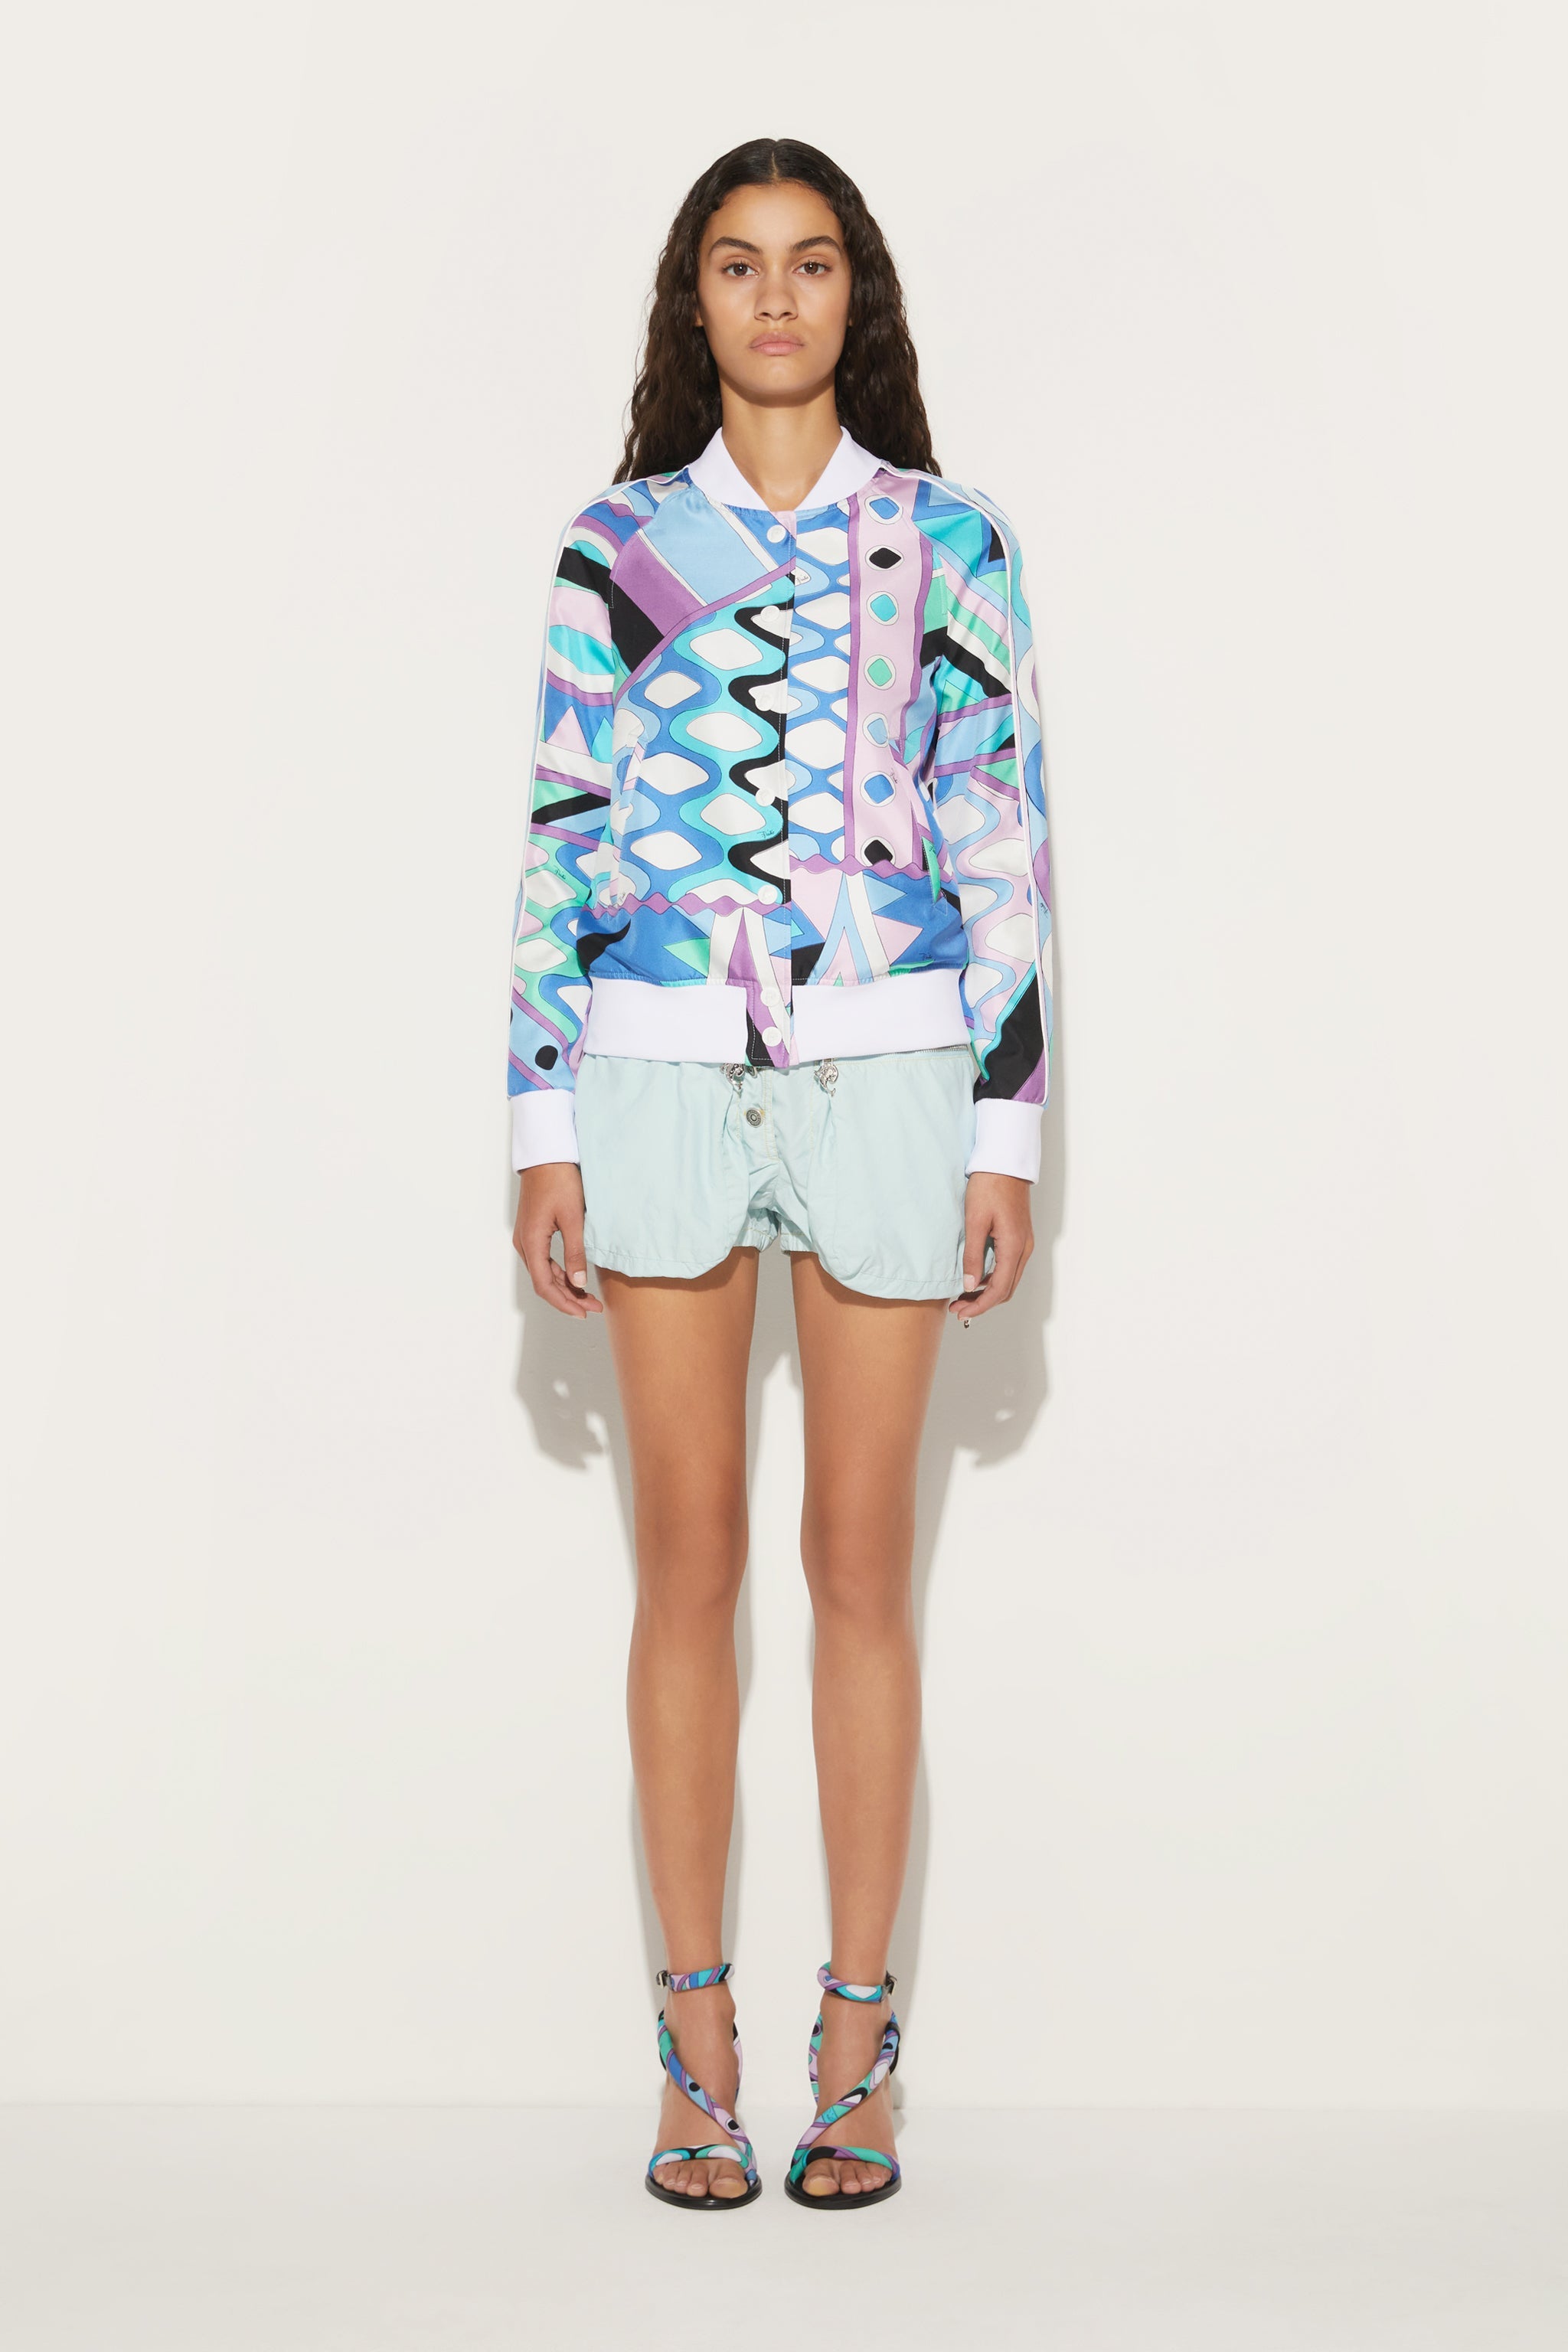 Pucci jackets collection | Pucci